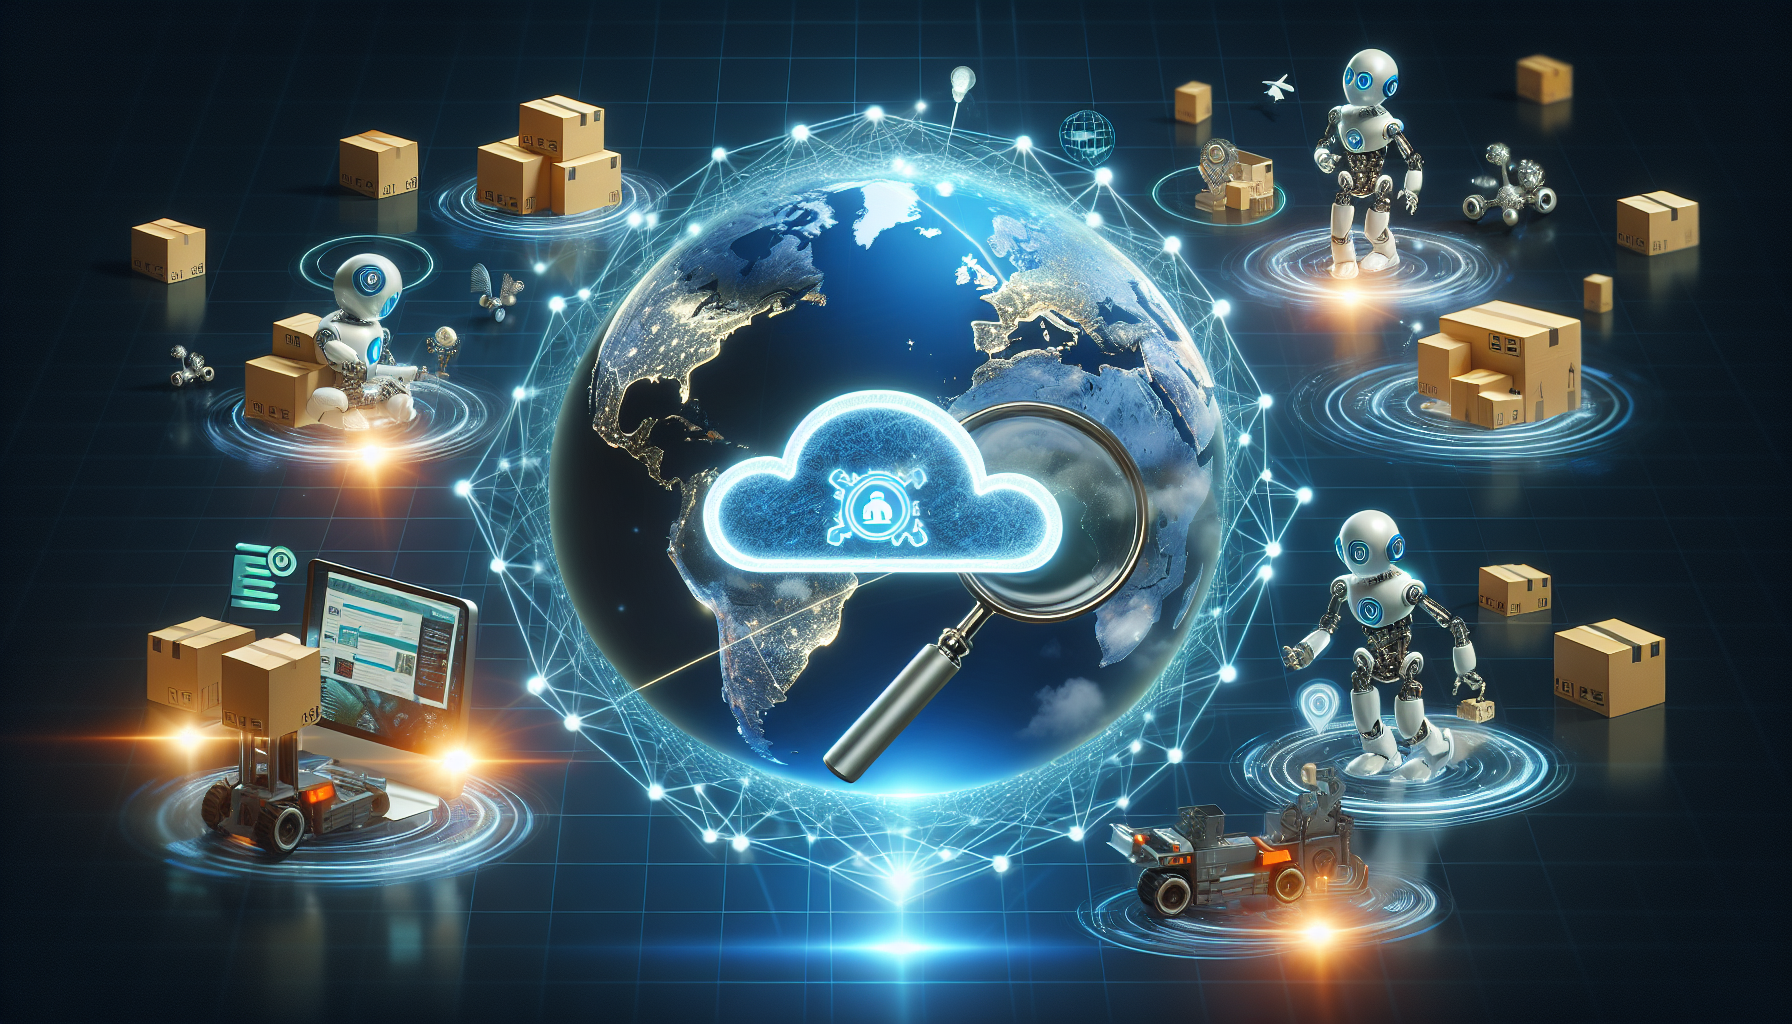 Alibaba Cloud's AI capabilities and global reach enabling retailers to deliver better and customized services